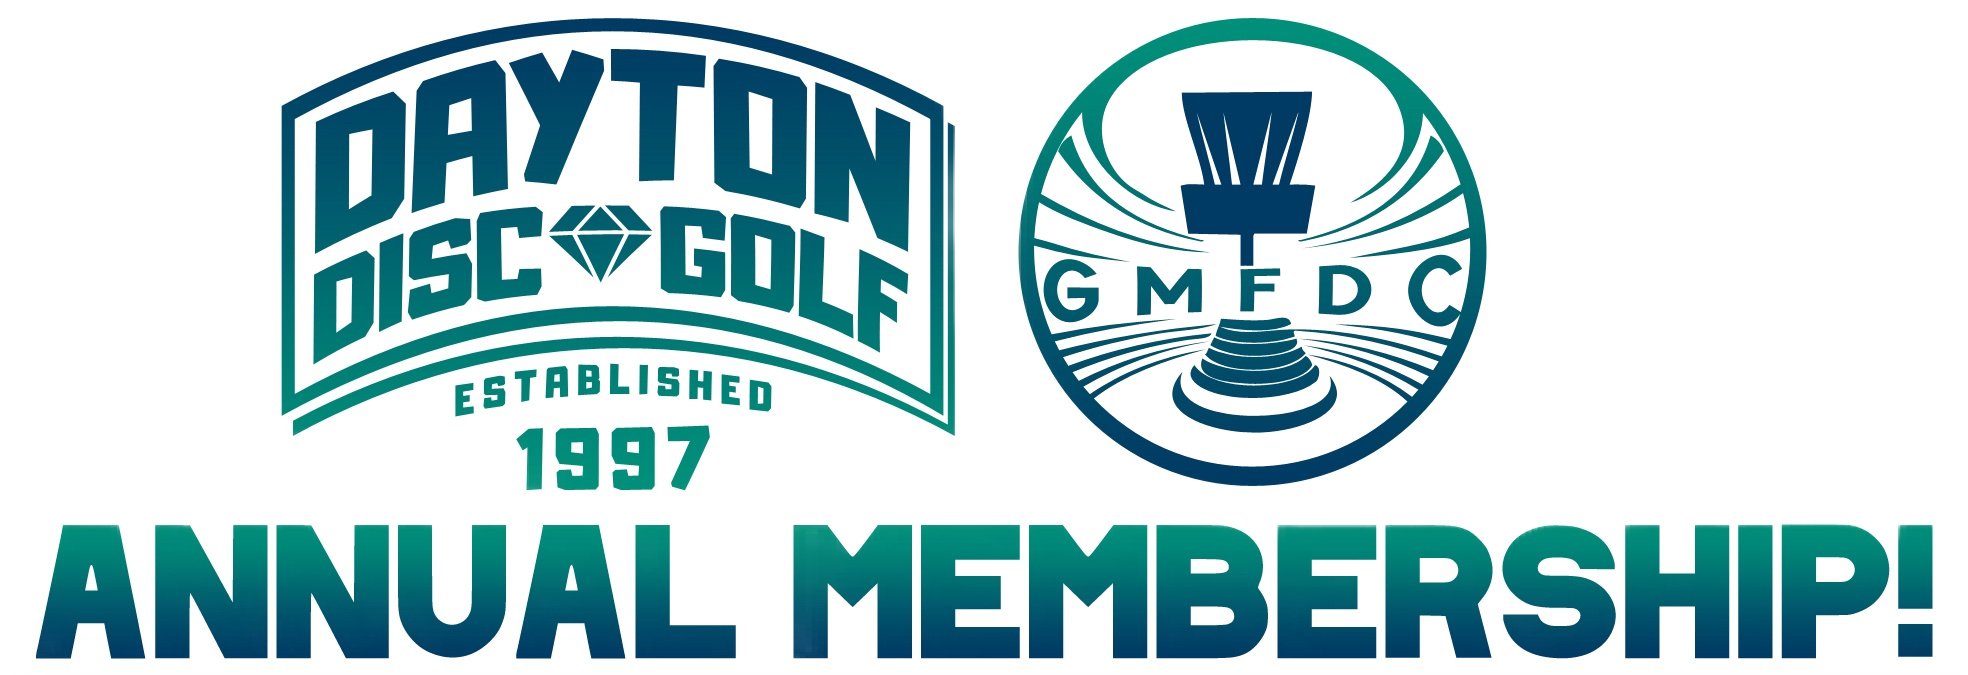 DDG and GMFDC Annual Membership